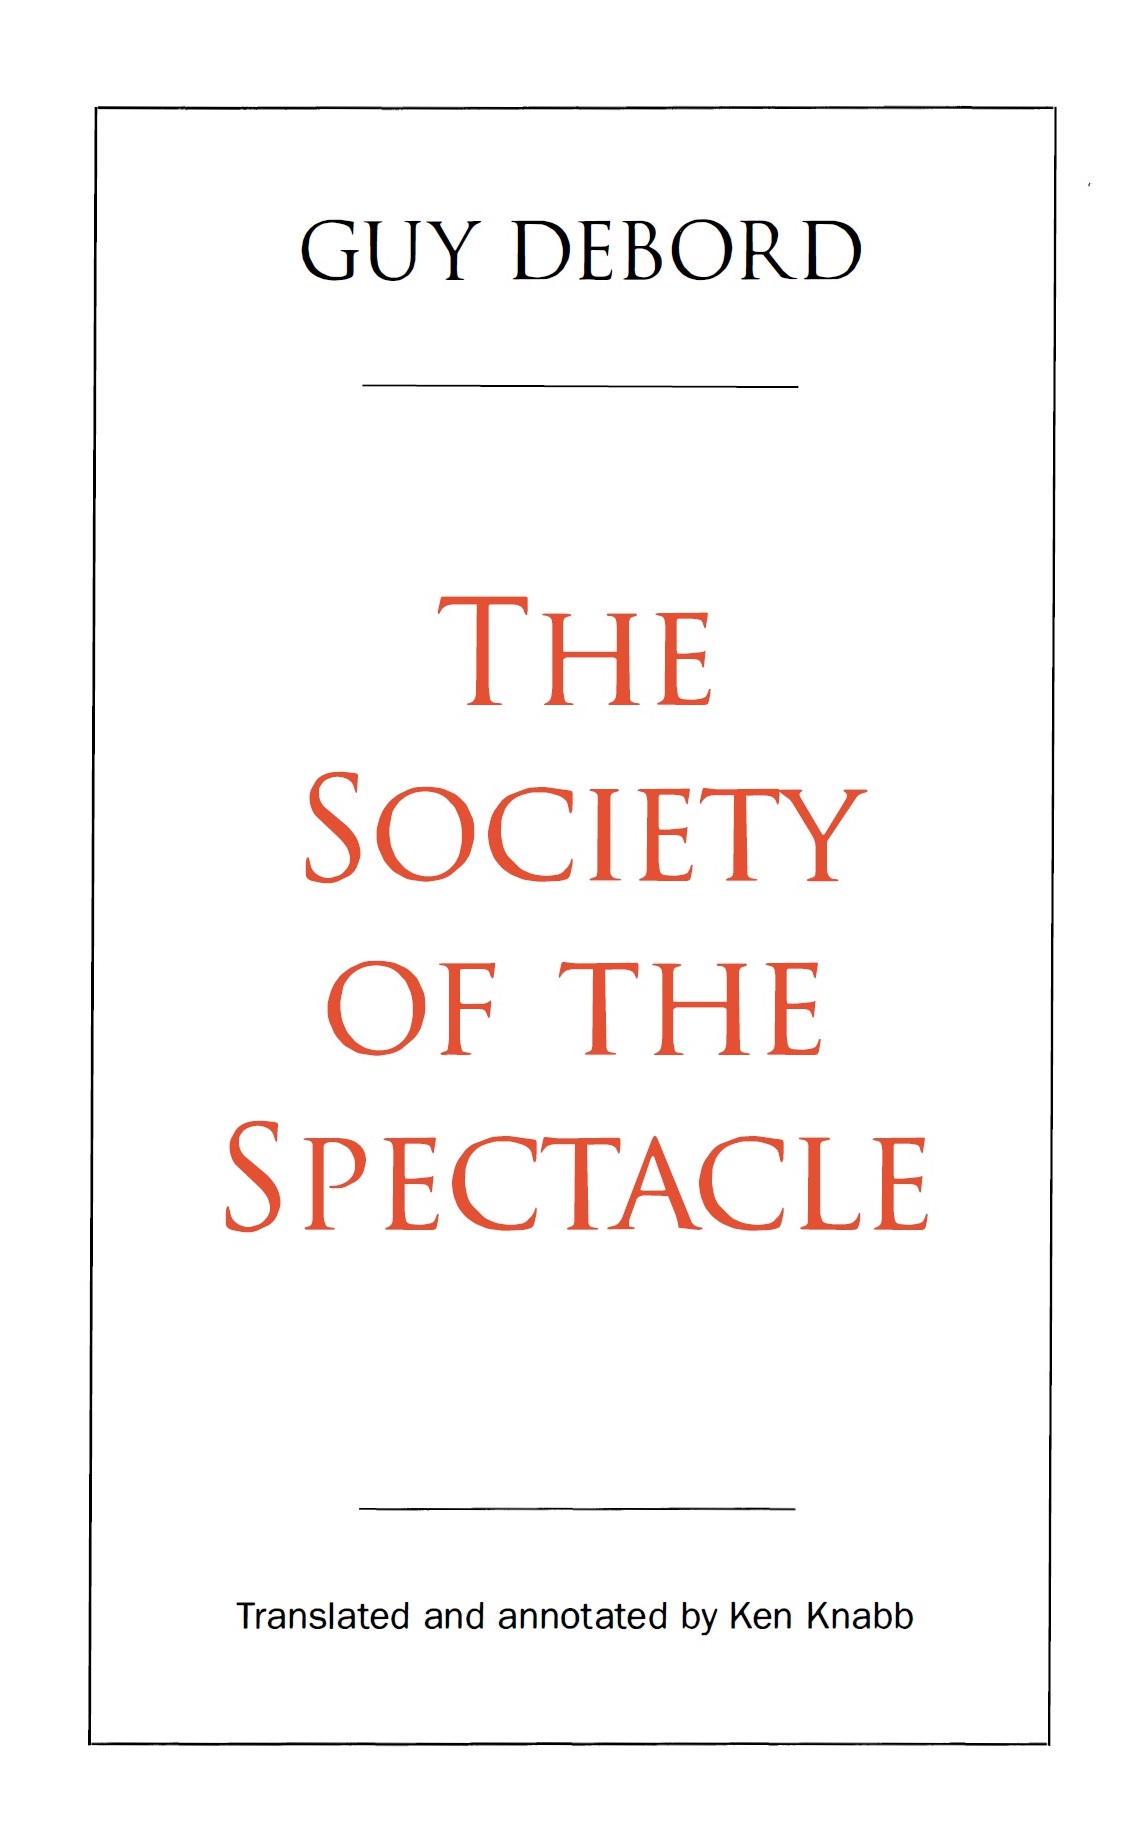 Guy-debord-the-society-of-the-spectacle-theoryleaks.jpg